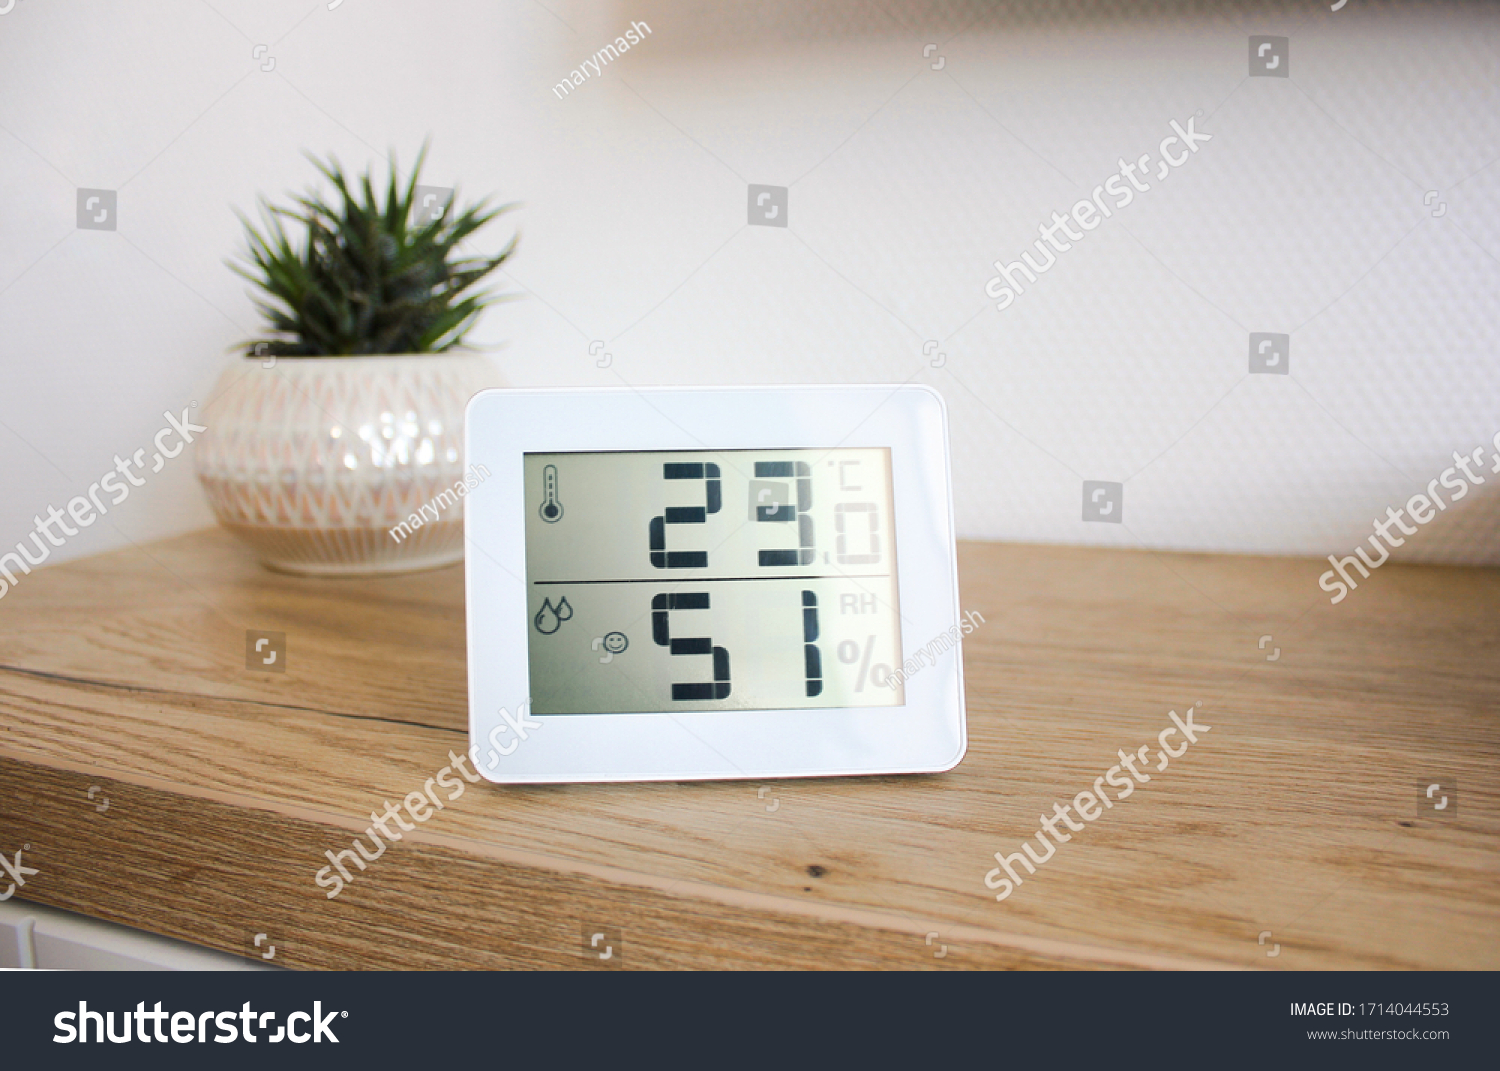 Thermometer hygrometer measuring the optimum temperature and humidity in a house, apartment or office, a photo for articles about the house’s microclimate, health, disease relief and virus treatment #1714044553